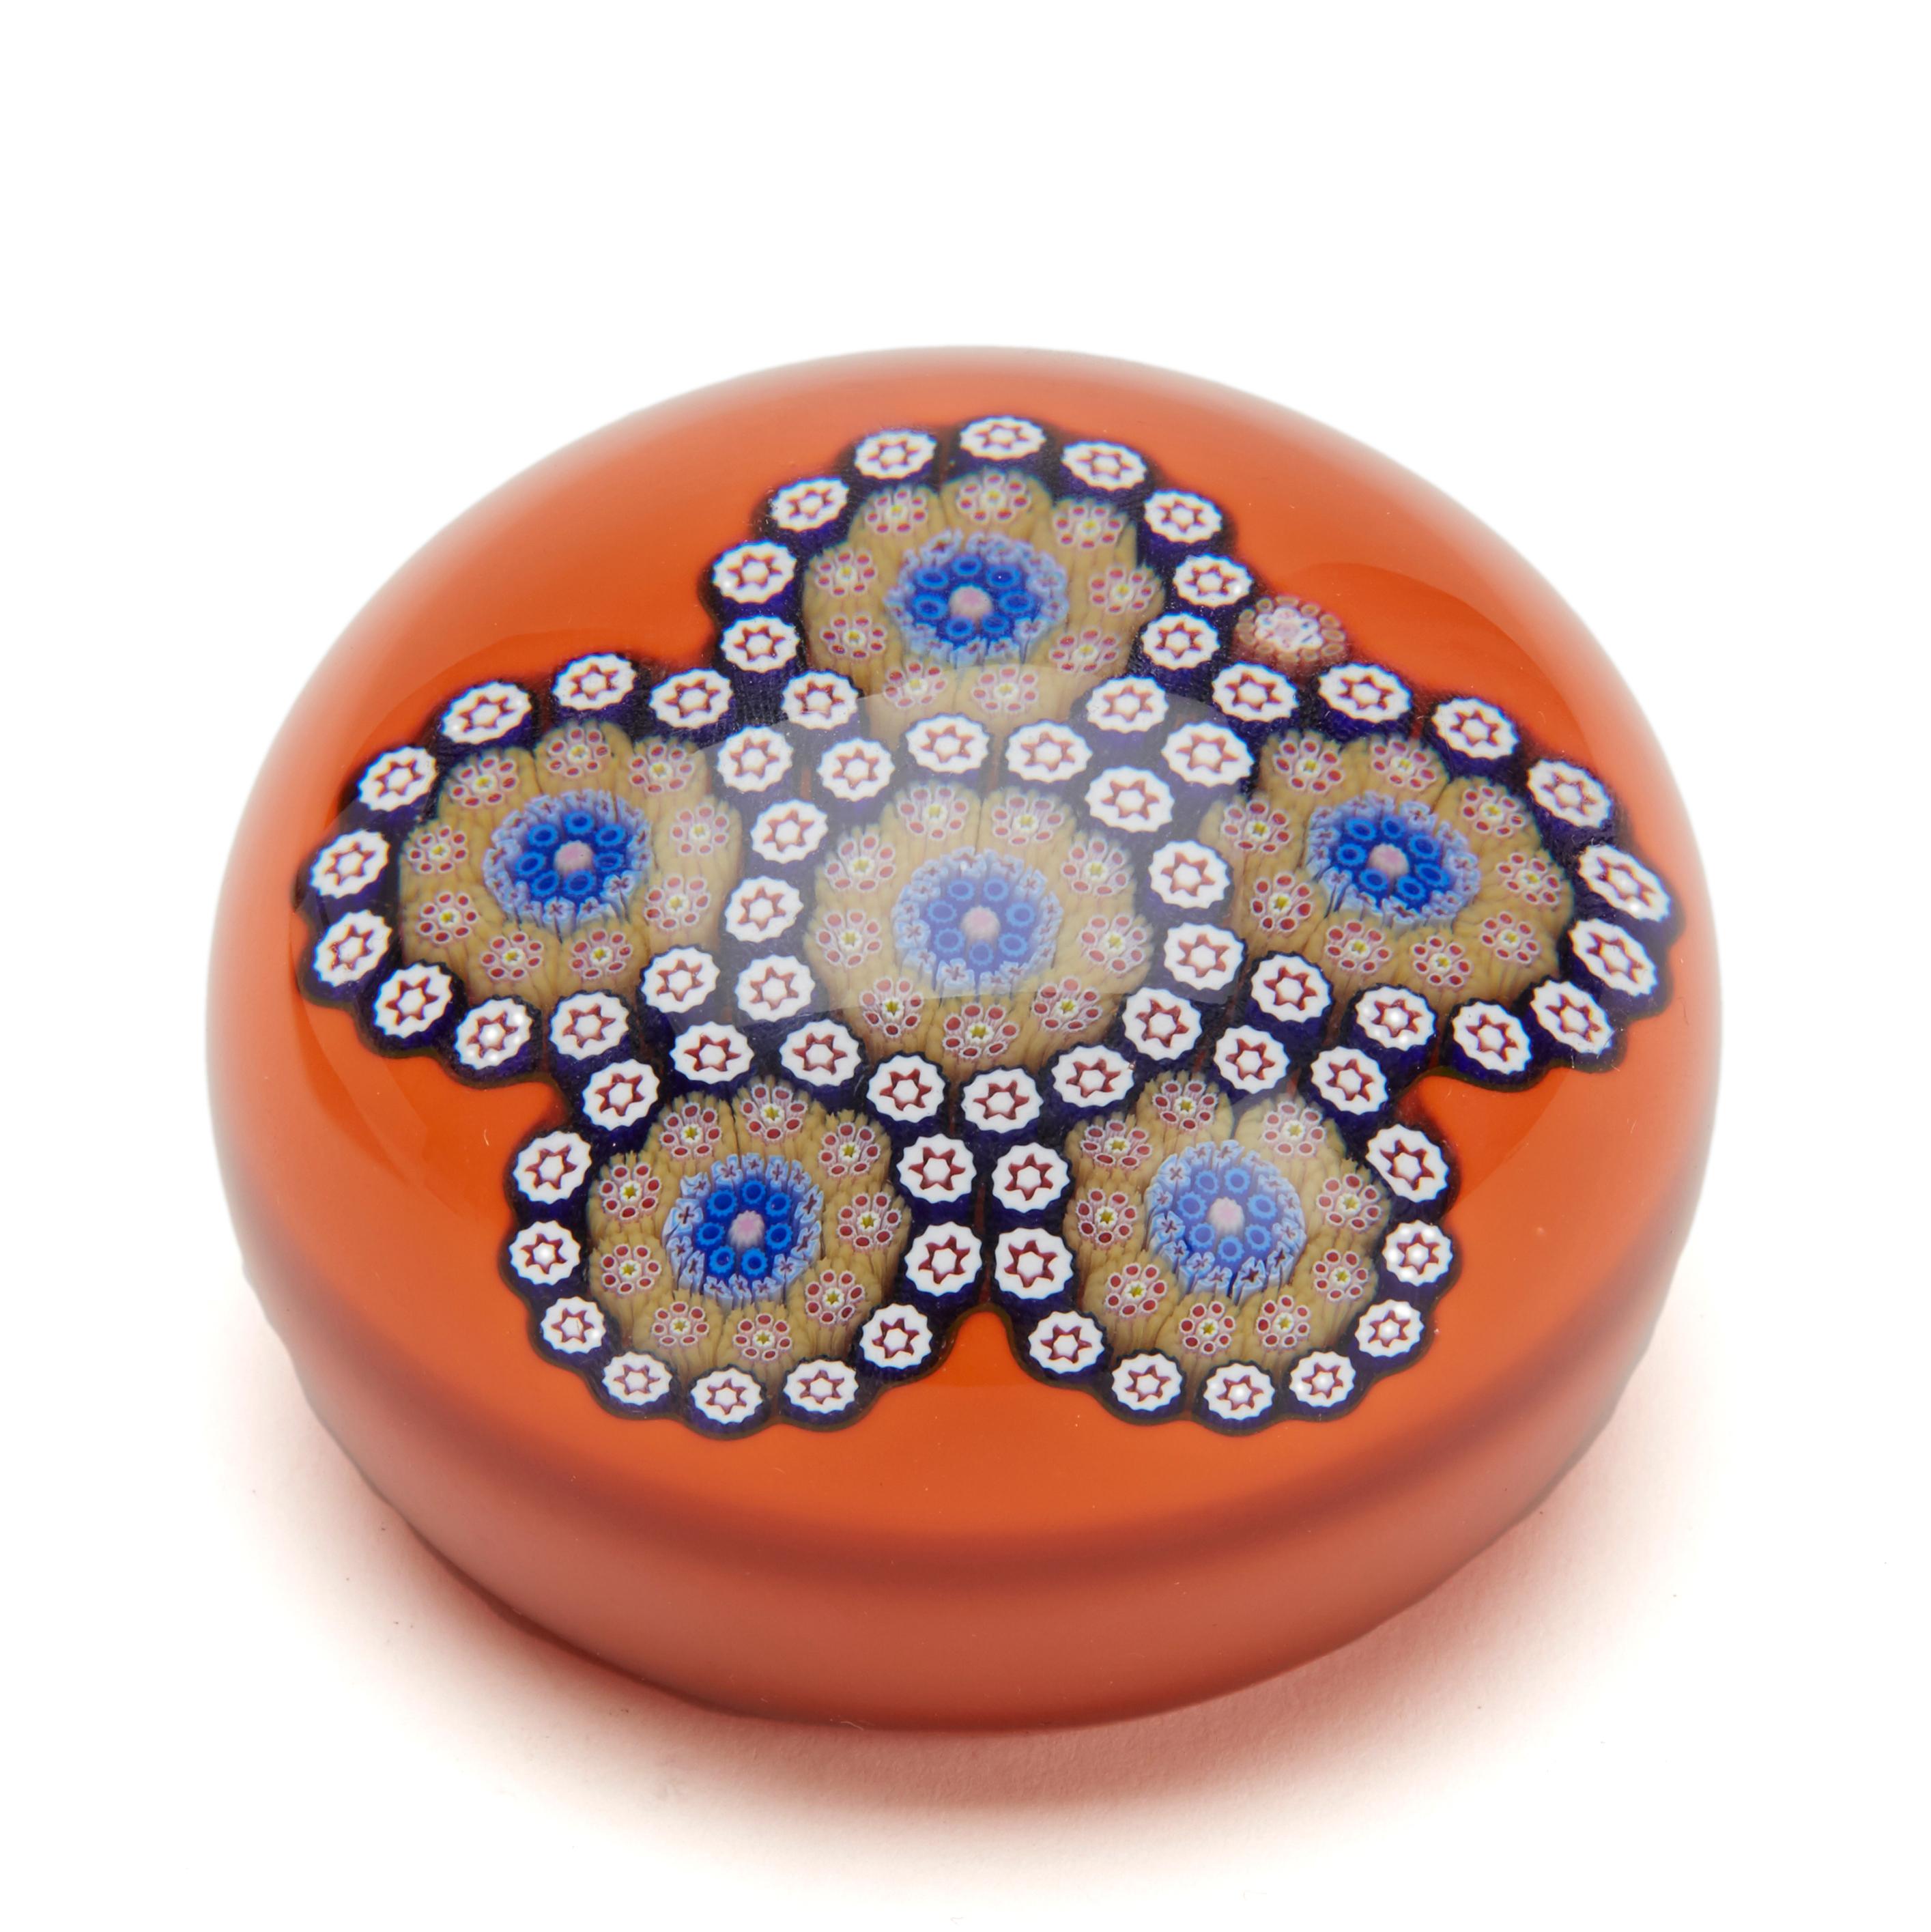 A fine vintage French Saint Louis limited edition Millefiori glass paperweight with a five 'petal' floral arrangement in coloured canes on an orange cushion ground incorporating a signature cane marked SL 1984. The paperweight has its original box